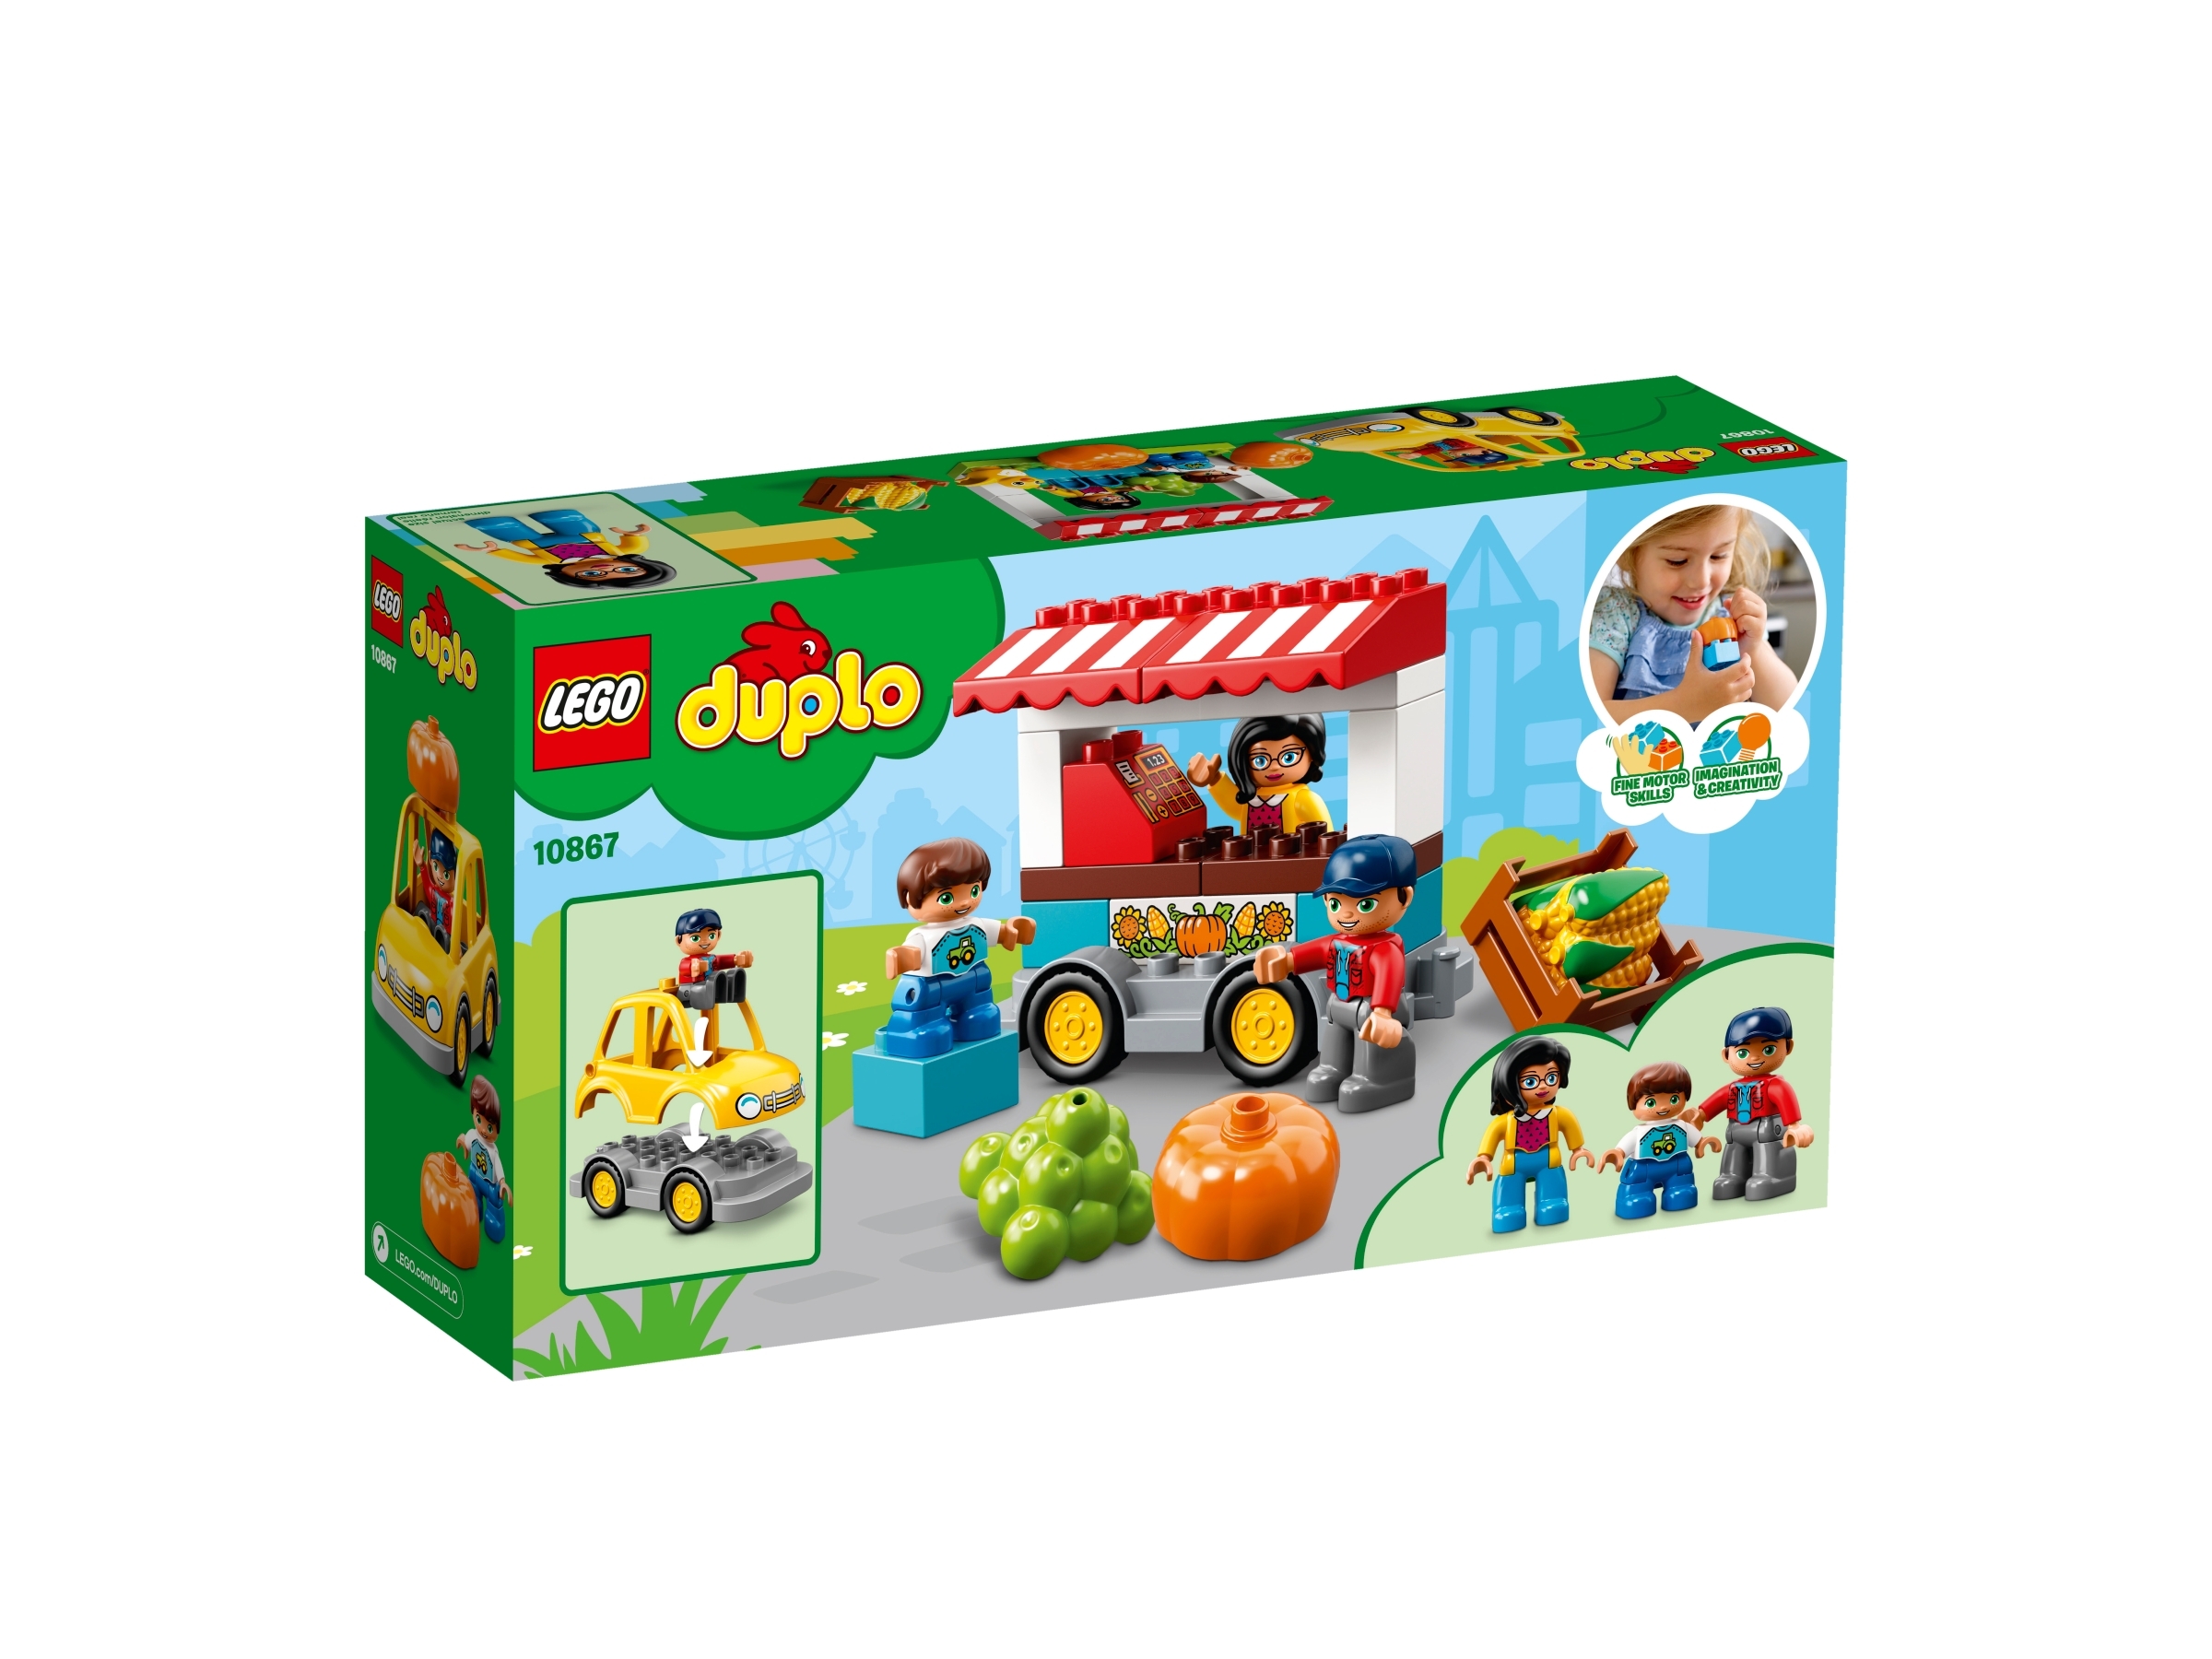 LEGO DUPLO Fruit & Vegetables Gift Pack 66776  Exclusive STEM Toy for  Toddlers Ages 1-3, Grow-Your-Own Food Toy for Imaginative Role Play